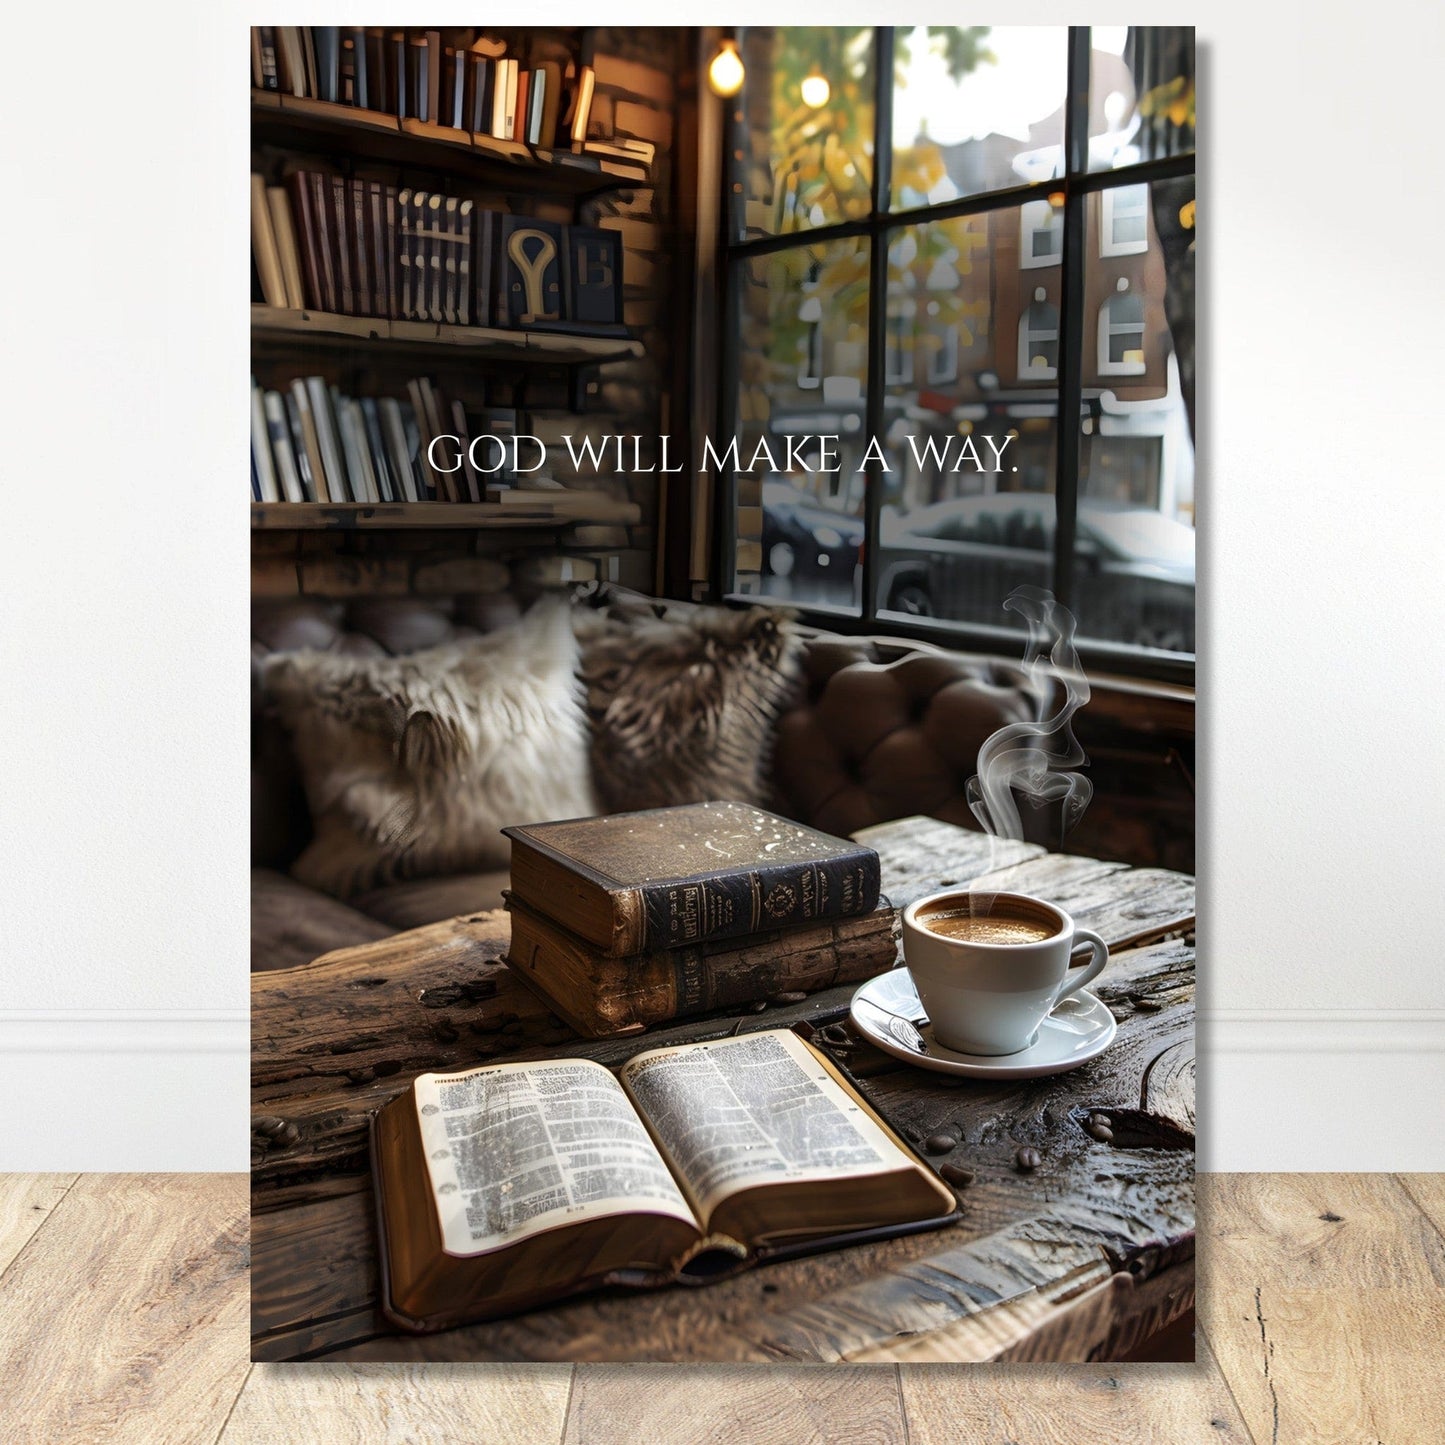 Coffee With My Father Print Material A4 21x29.7 cm / 8x12″ / Premium Matte Paper Poster / - God Will Make A Way